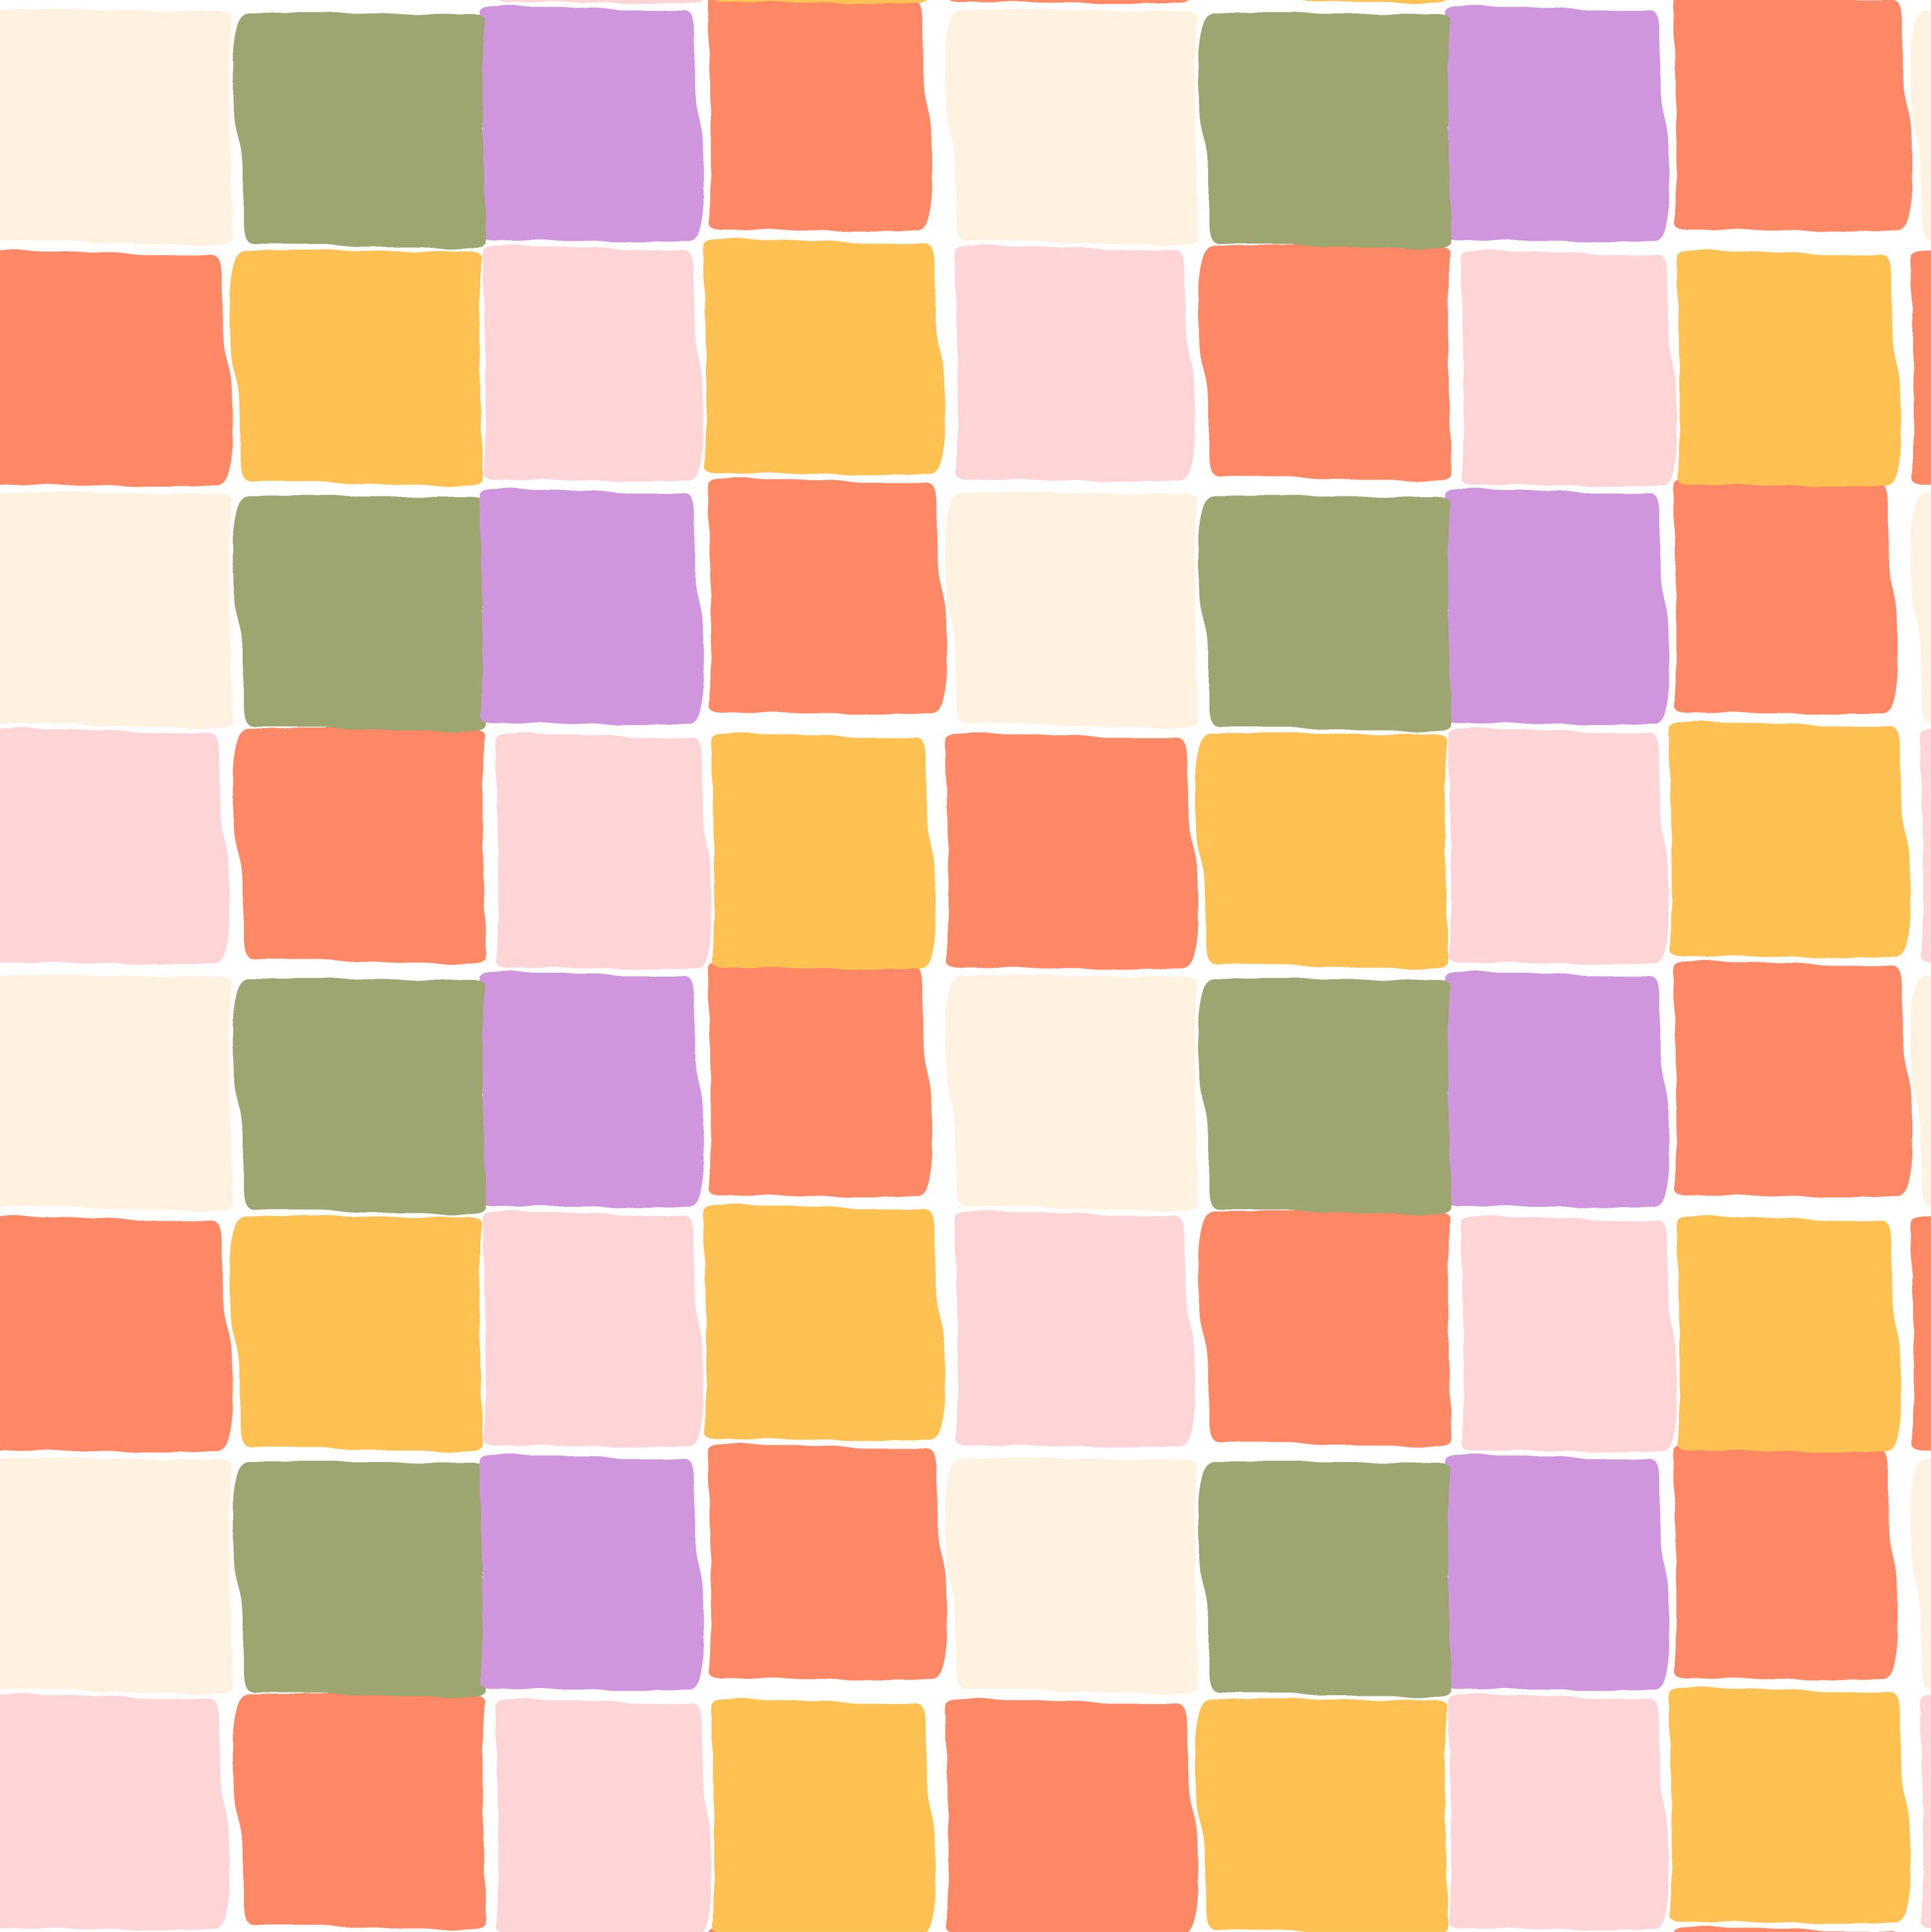 A vibrant, colorful wallpaper featuring a checker pattern with squares in shades of orange, pink, purple, green, and yellow. The colors are soft yet vivid, creating a playful and inviting atmosphere ideal for any room needing a pop of color.